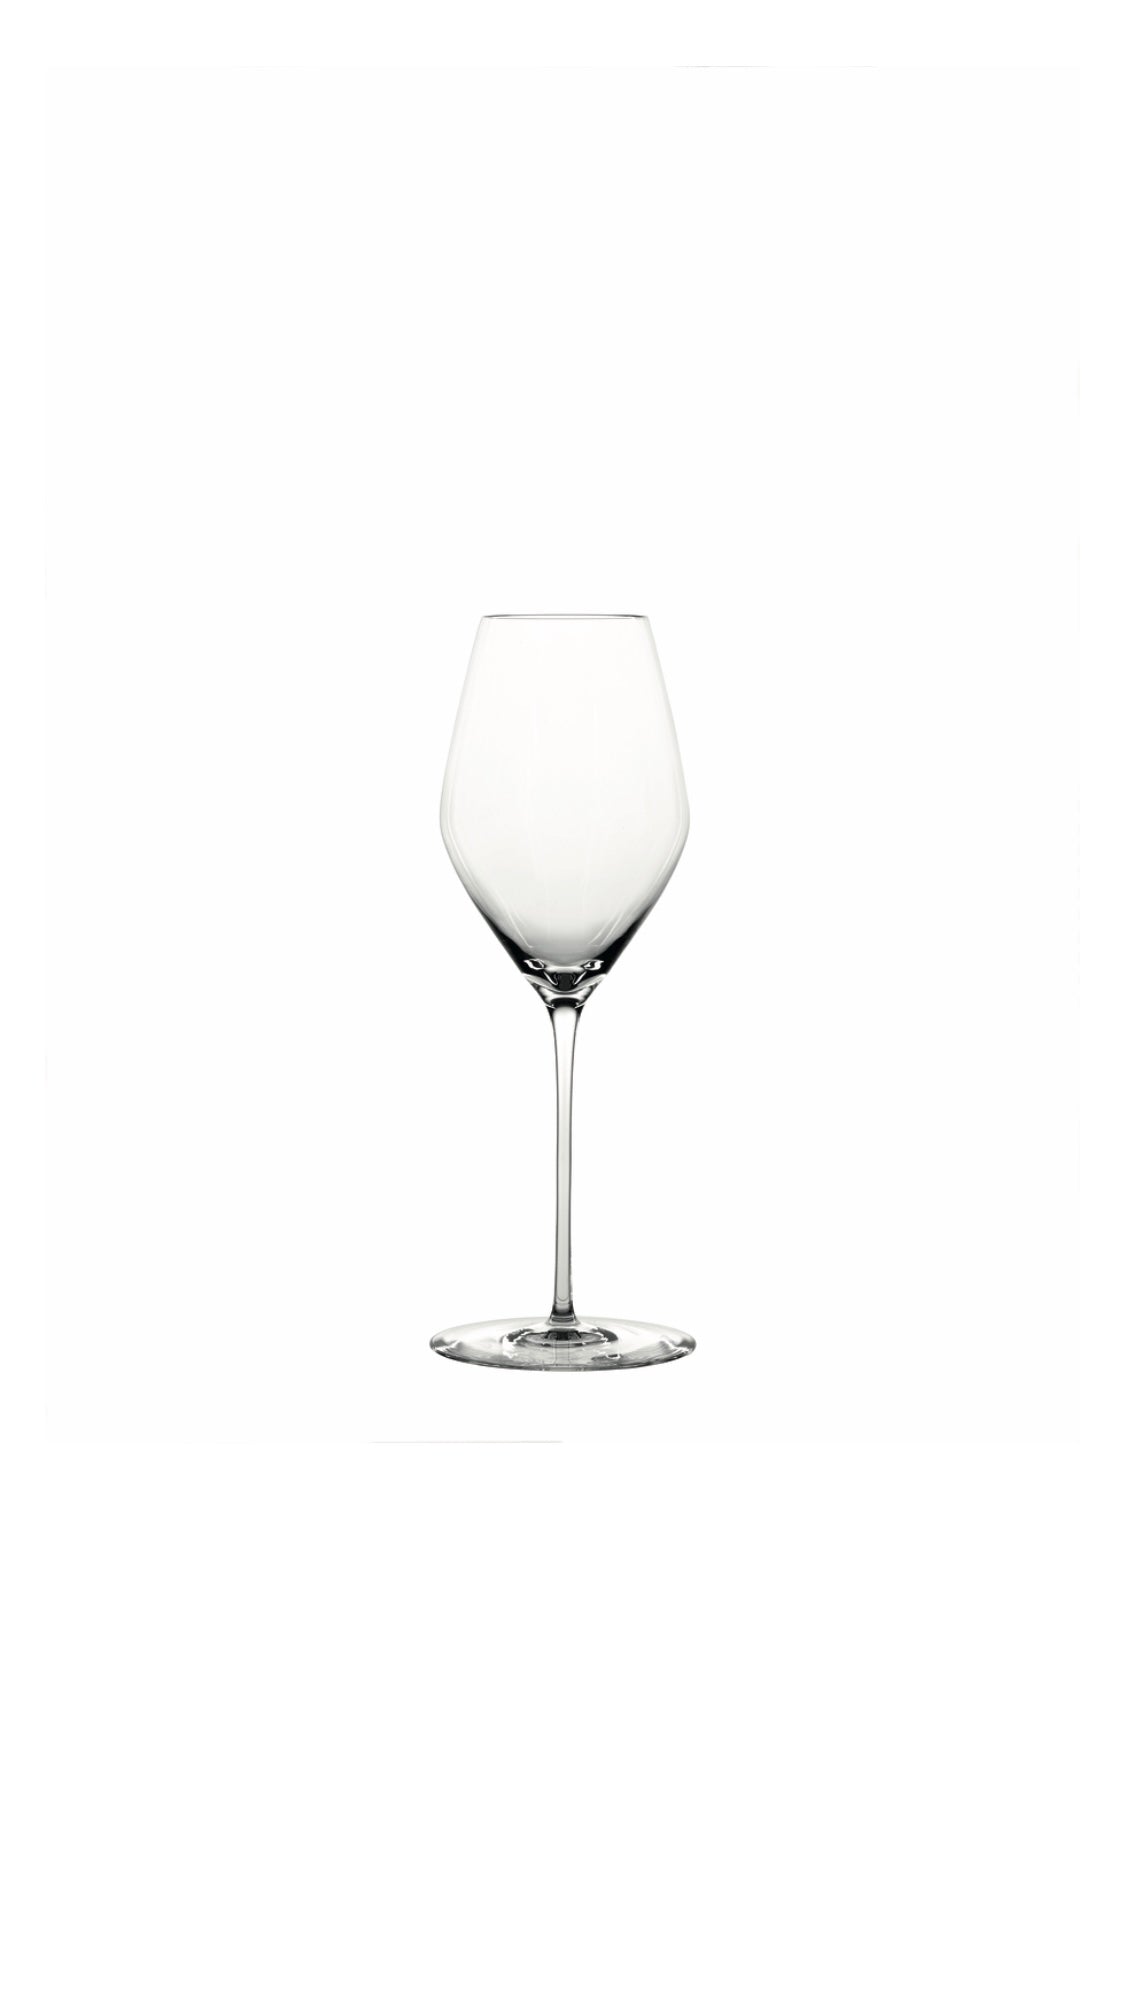 Highline Mouth Blown Champagne Glasses - Set of 2